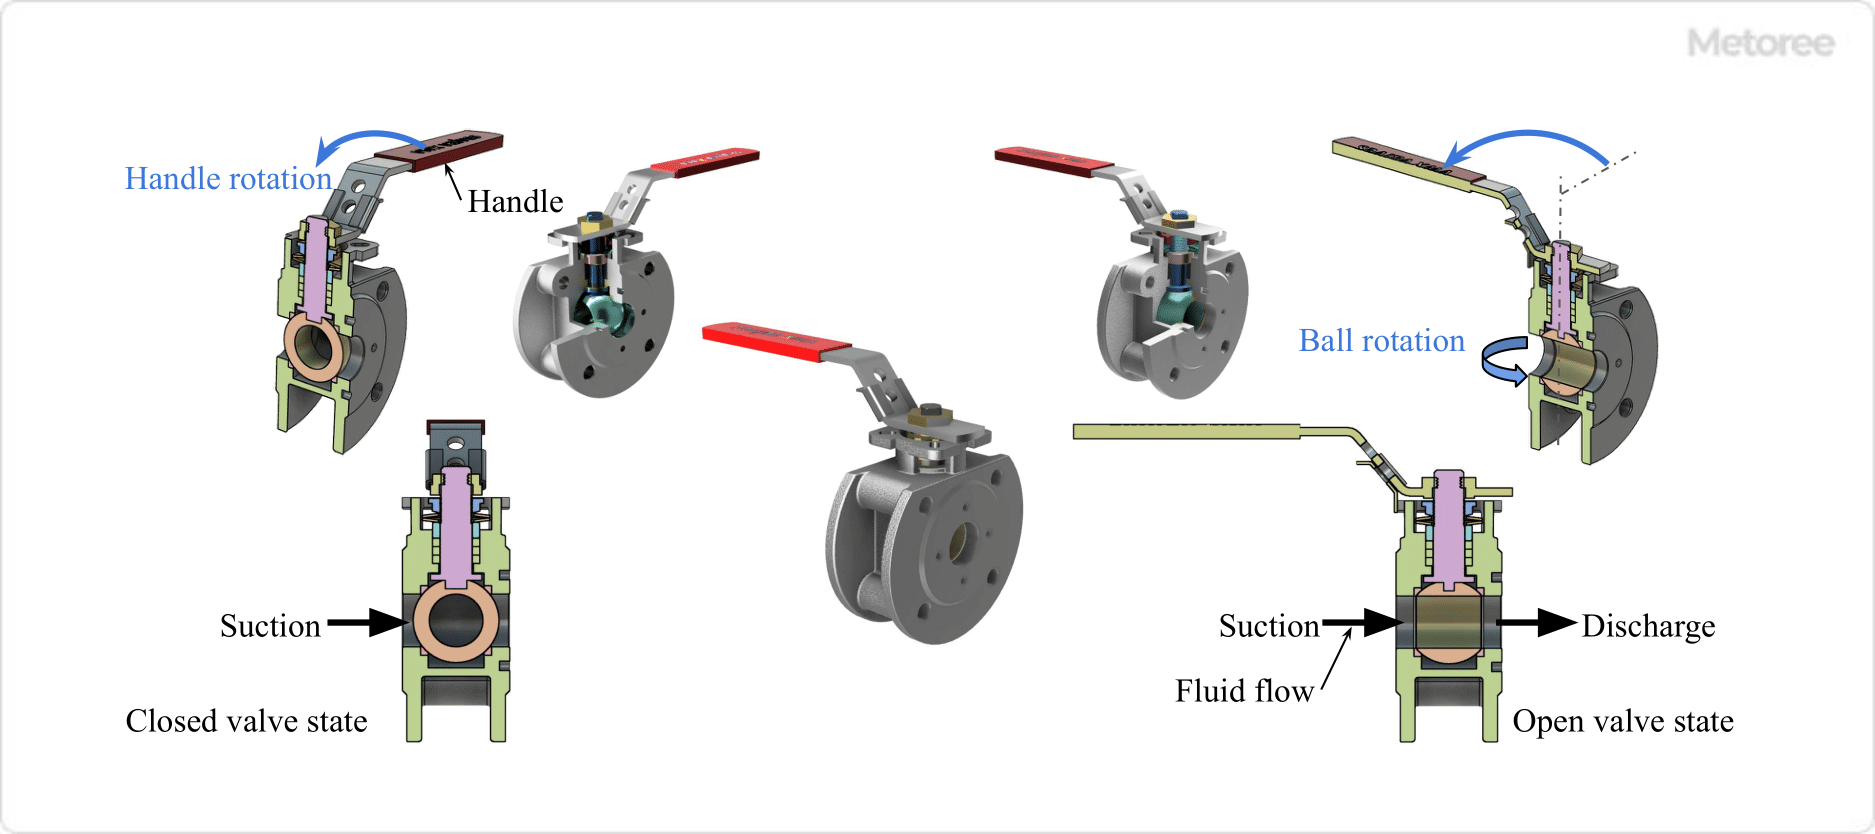 Figure 2. Ball valve opening and closing valve status and fluid flow